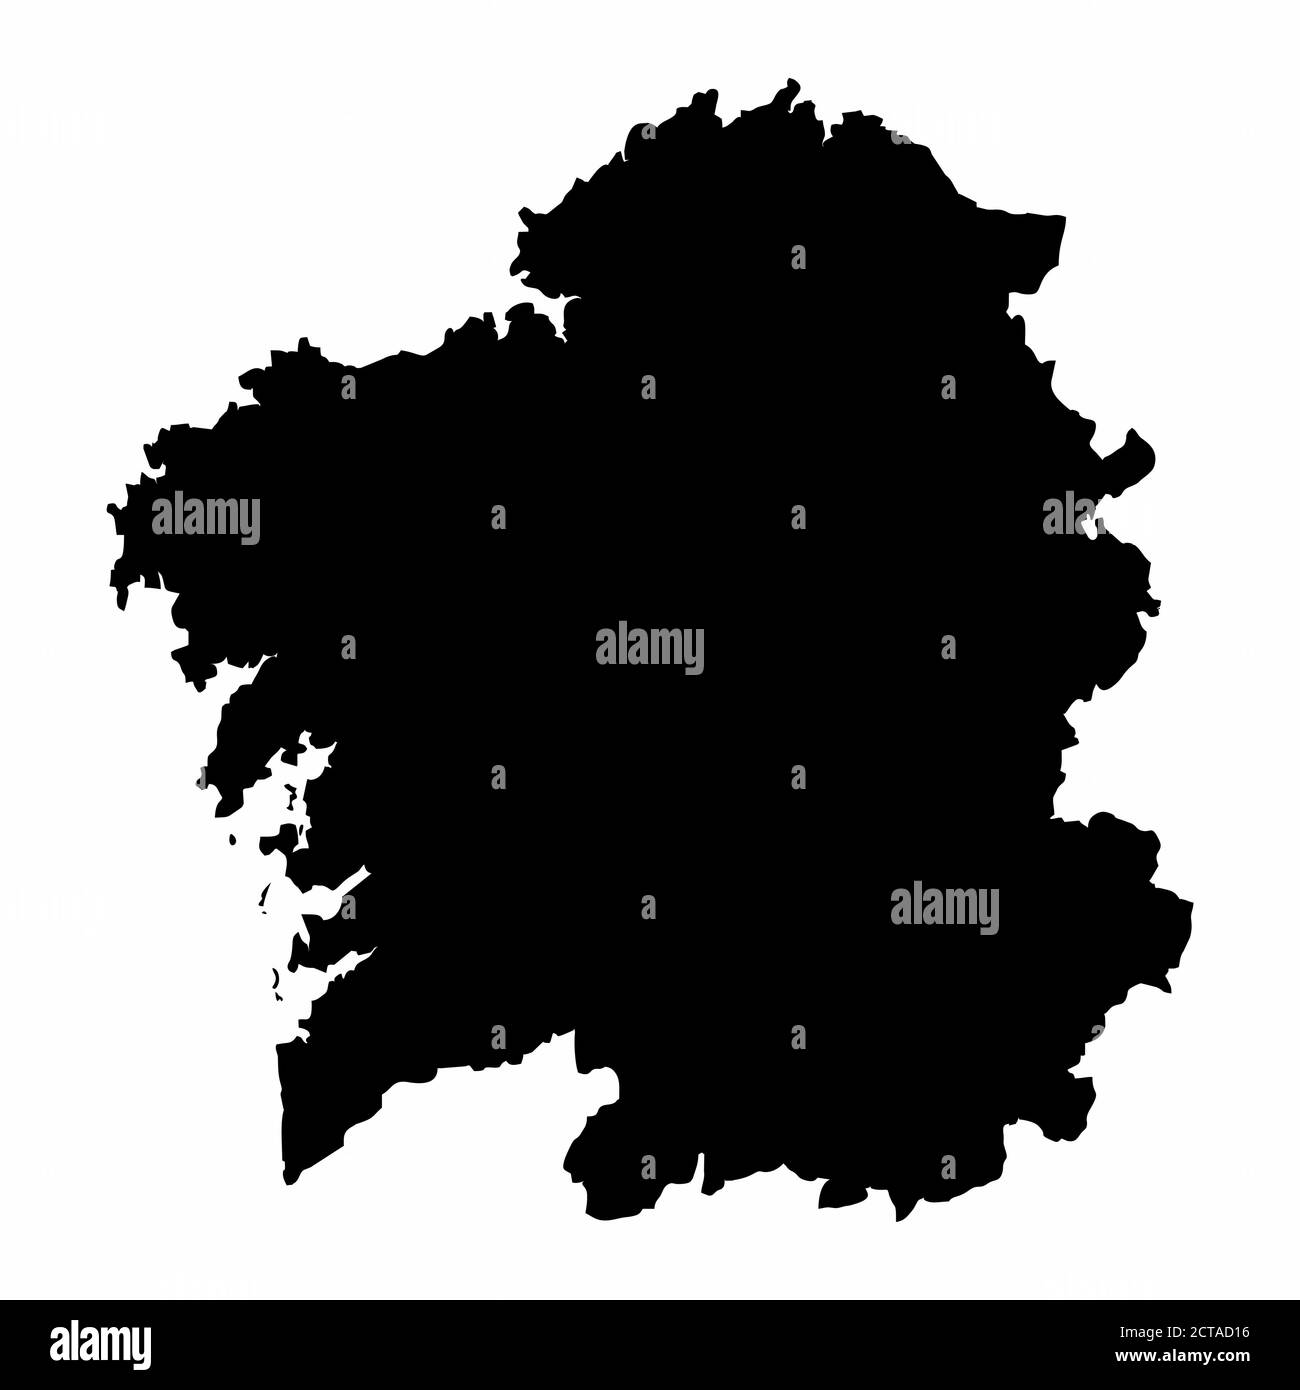 The Galicia region dark silhouette map isolated on white background, Spain Stock Vector